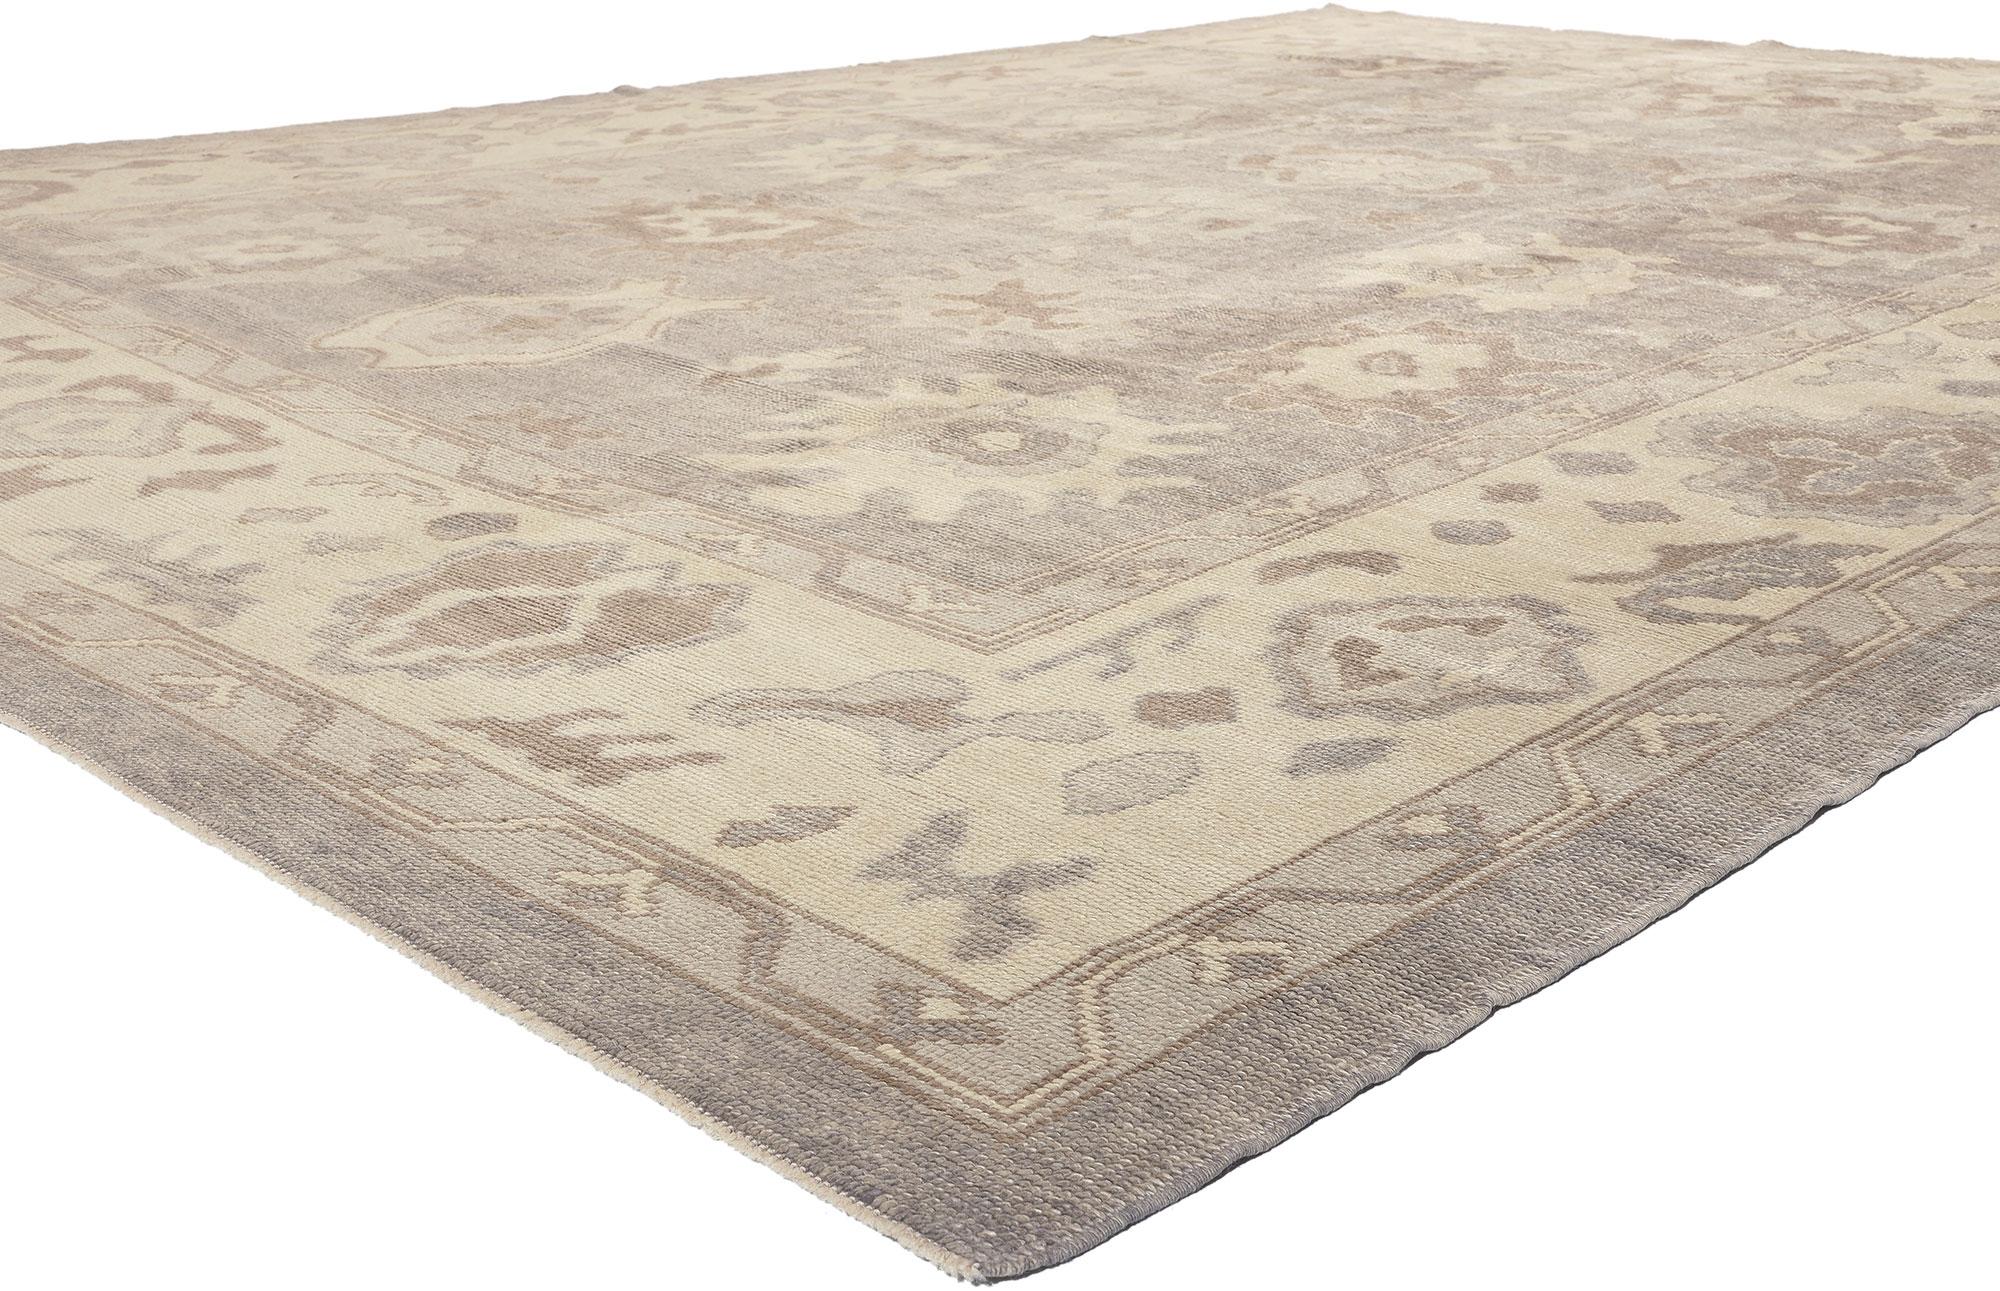 52373 Modern Gray Oushak Turkish Rug, 09'10 x 13'03. Embrace the essence of Shibui and Biophilic Design in this hand knotted wool modern Turkish Oushak rug, where subdued ornamentation weaves a captivating vision of beauty. The layers of tantalizing